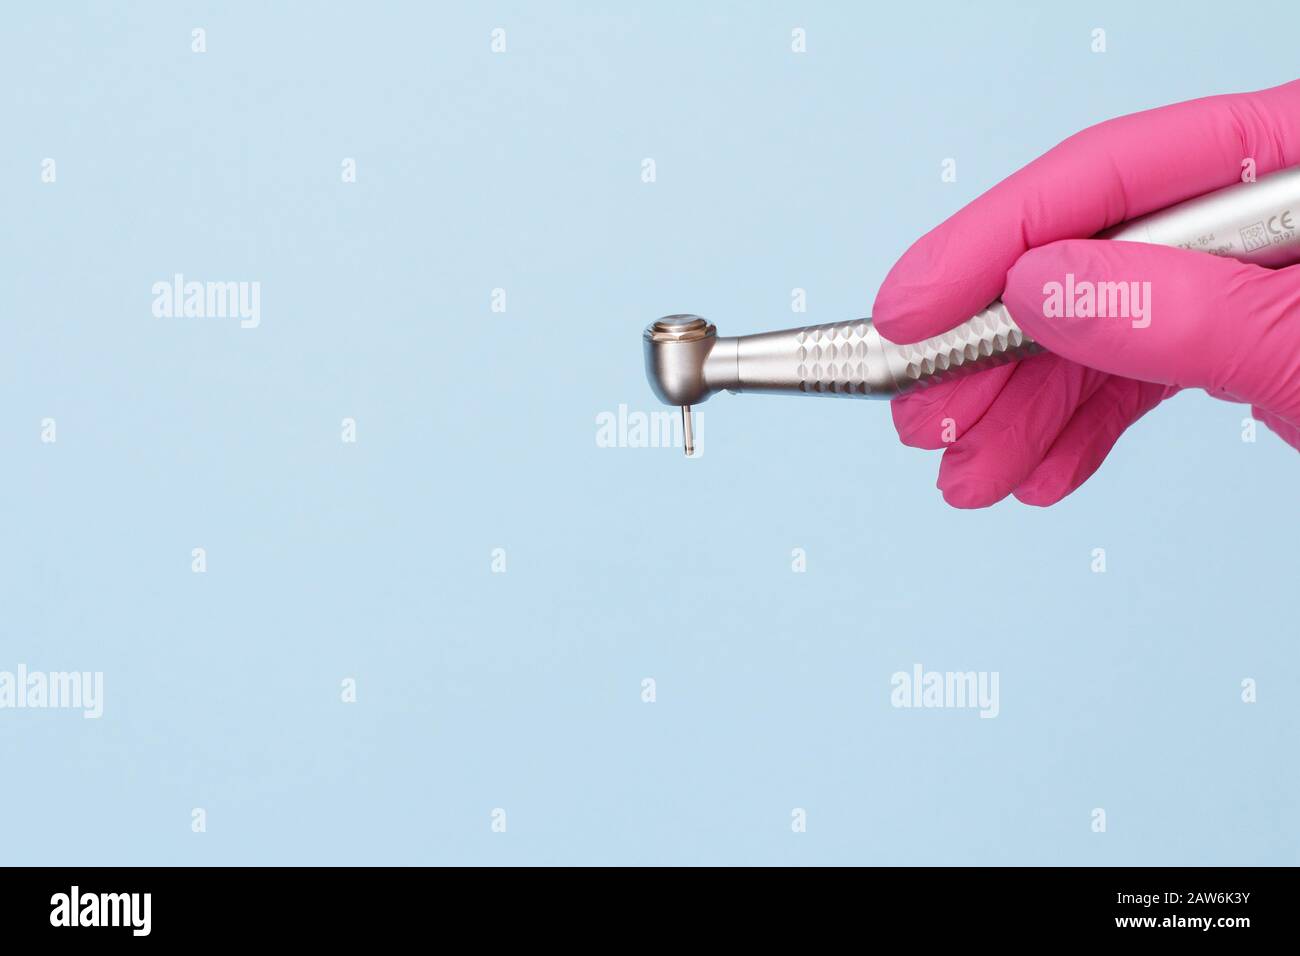 Dentist's hand in a pink rubber glove with high-speed dental handpiece on blue background. Medical tools concept. Stock Photo